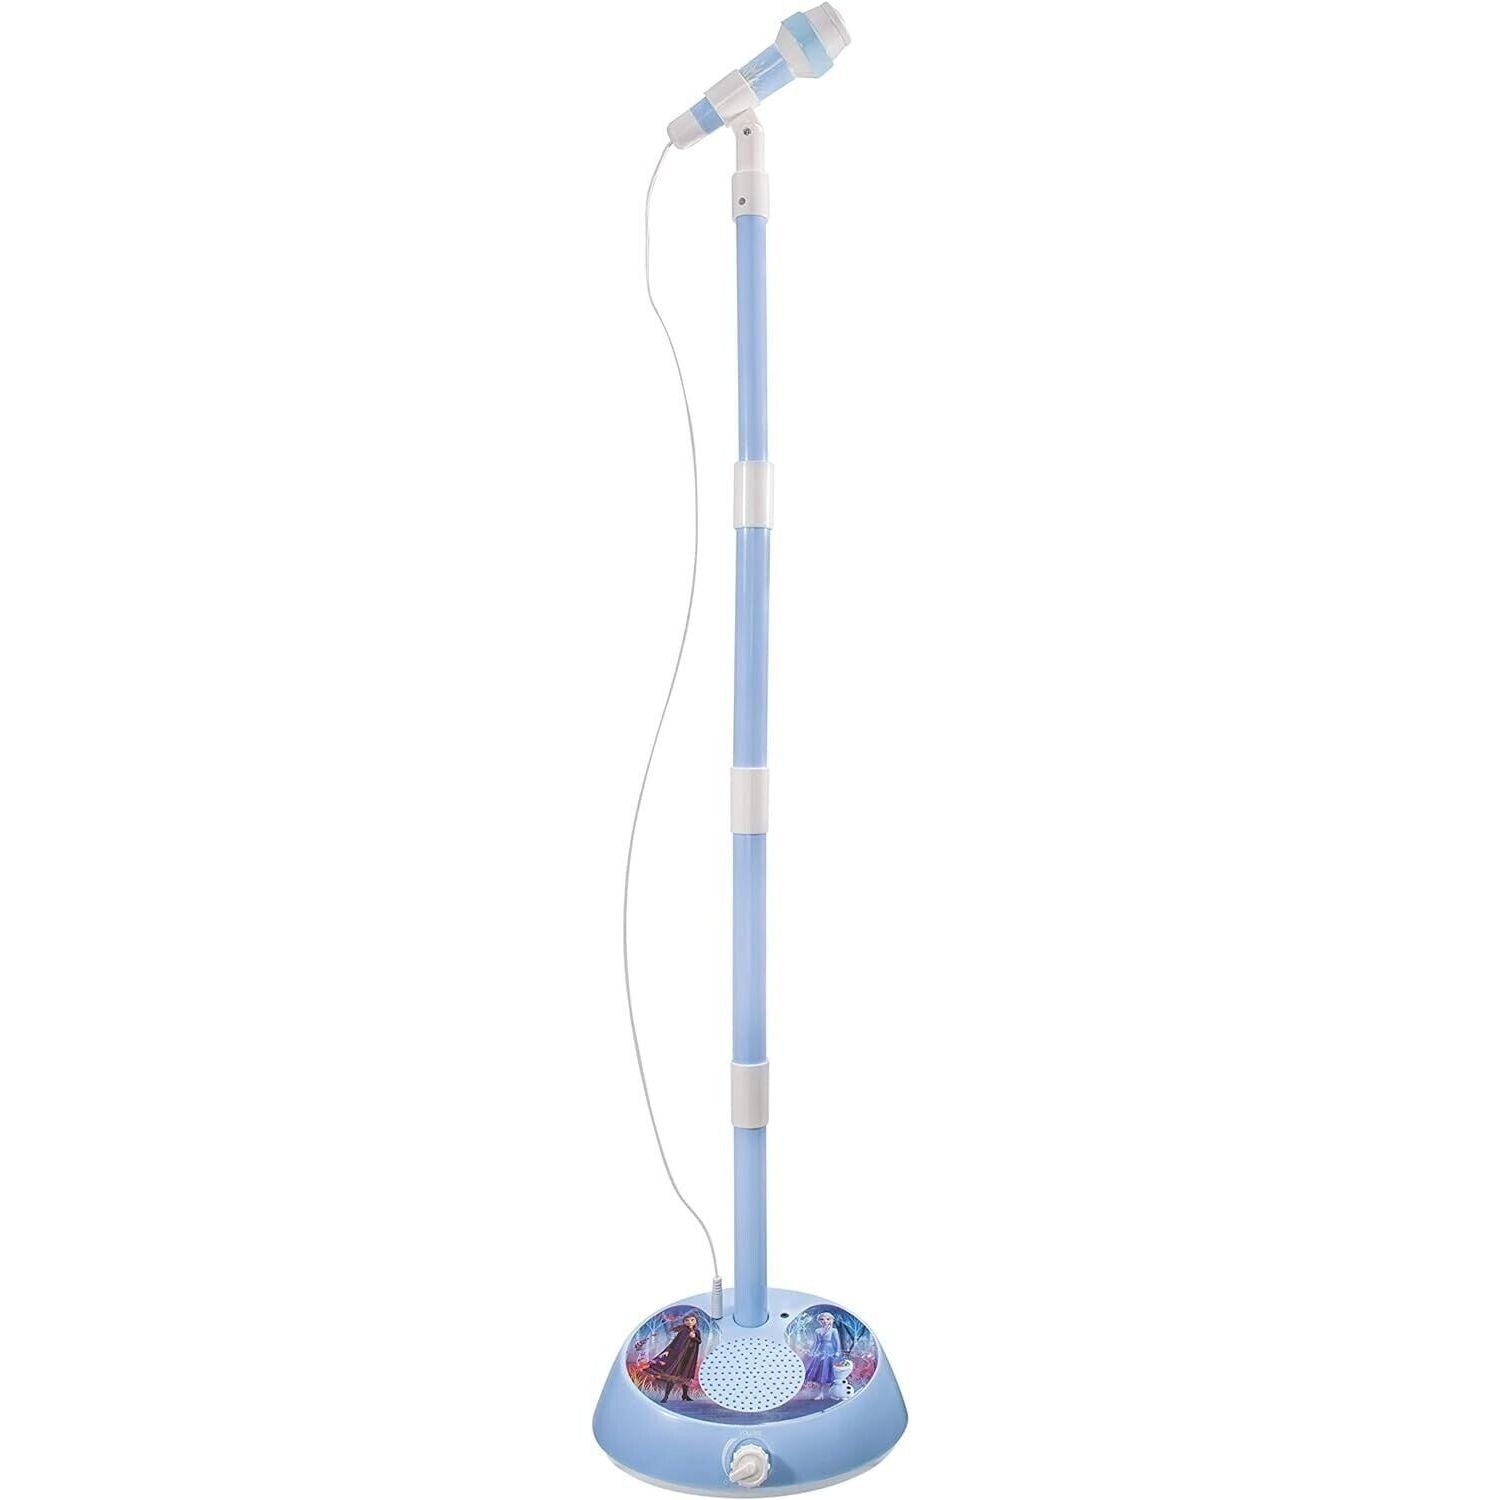 Disney Frozen Microphone & Amp Musical Toy Product Image